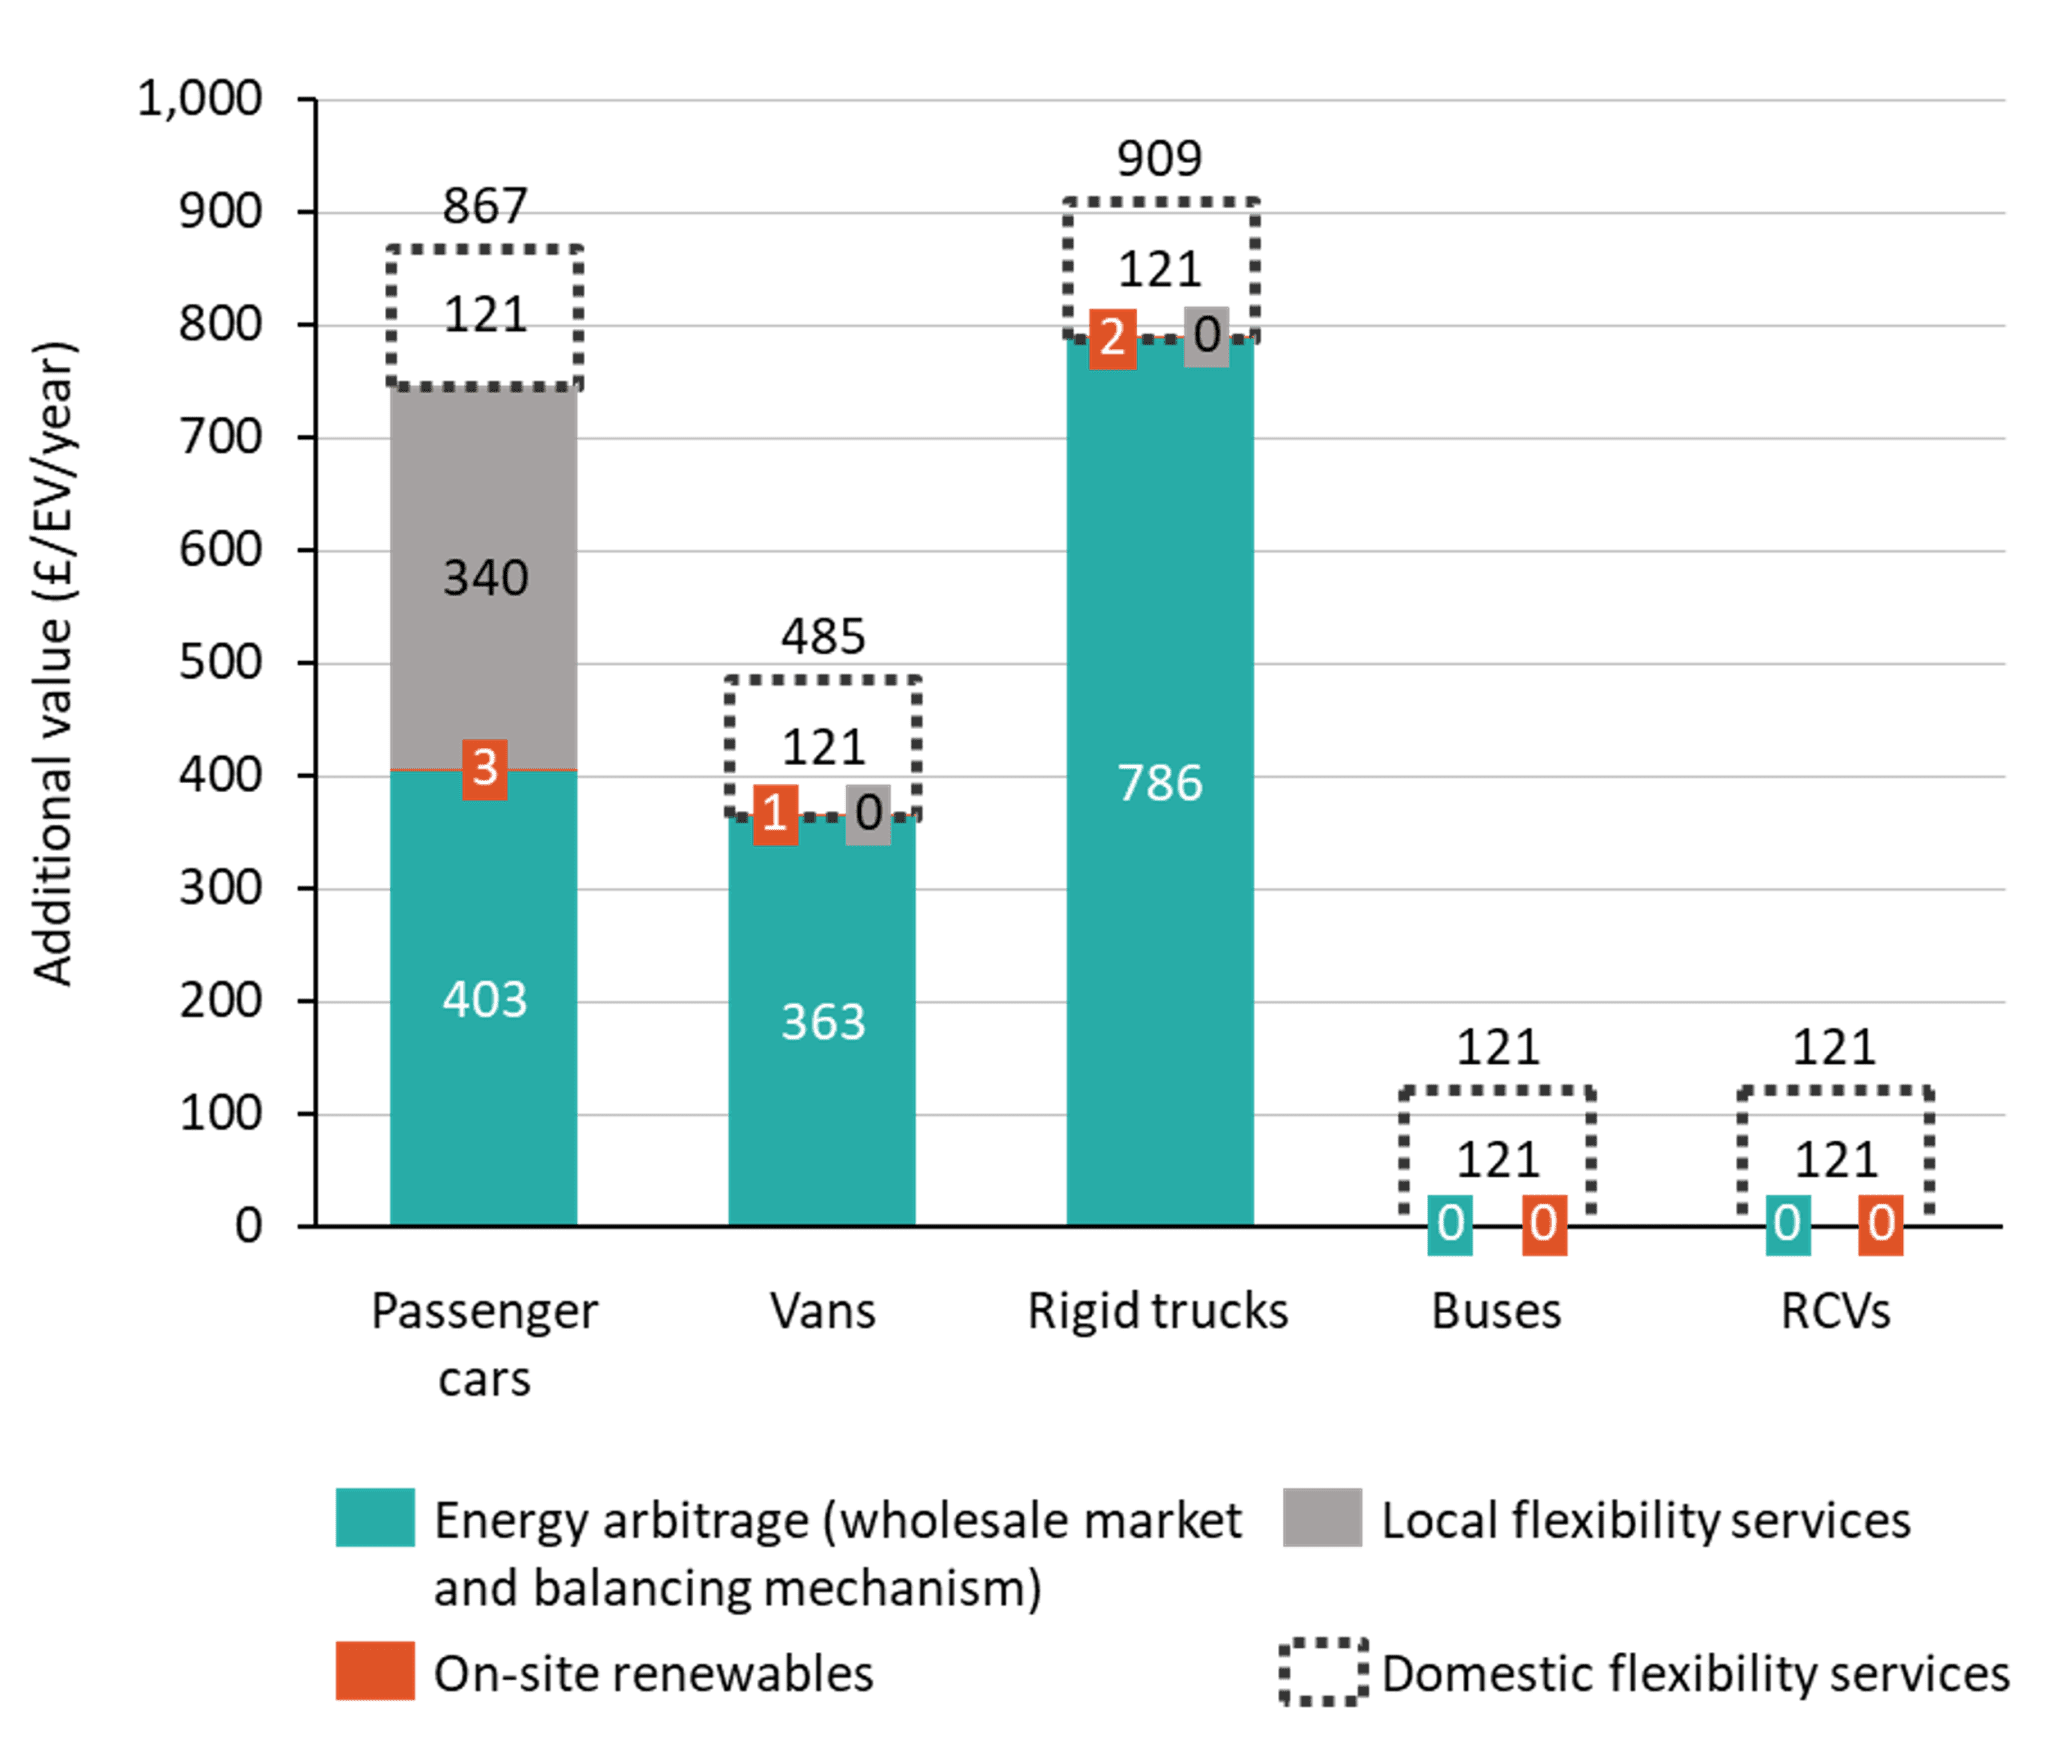 A bar chart showing the additional value from V2G with respect to passenger cars, vans, trucks, buses and refuse collection vehicles, respectively. The additional value is in terms of pounds per electric vehicles per year and the additional value is broken down into energy arbitrage (wholesale market and balancing mechanism), local flexibility services, domestic flexibility services and on-site renewables. 